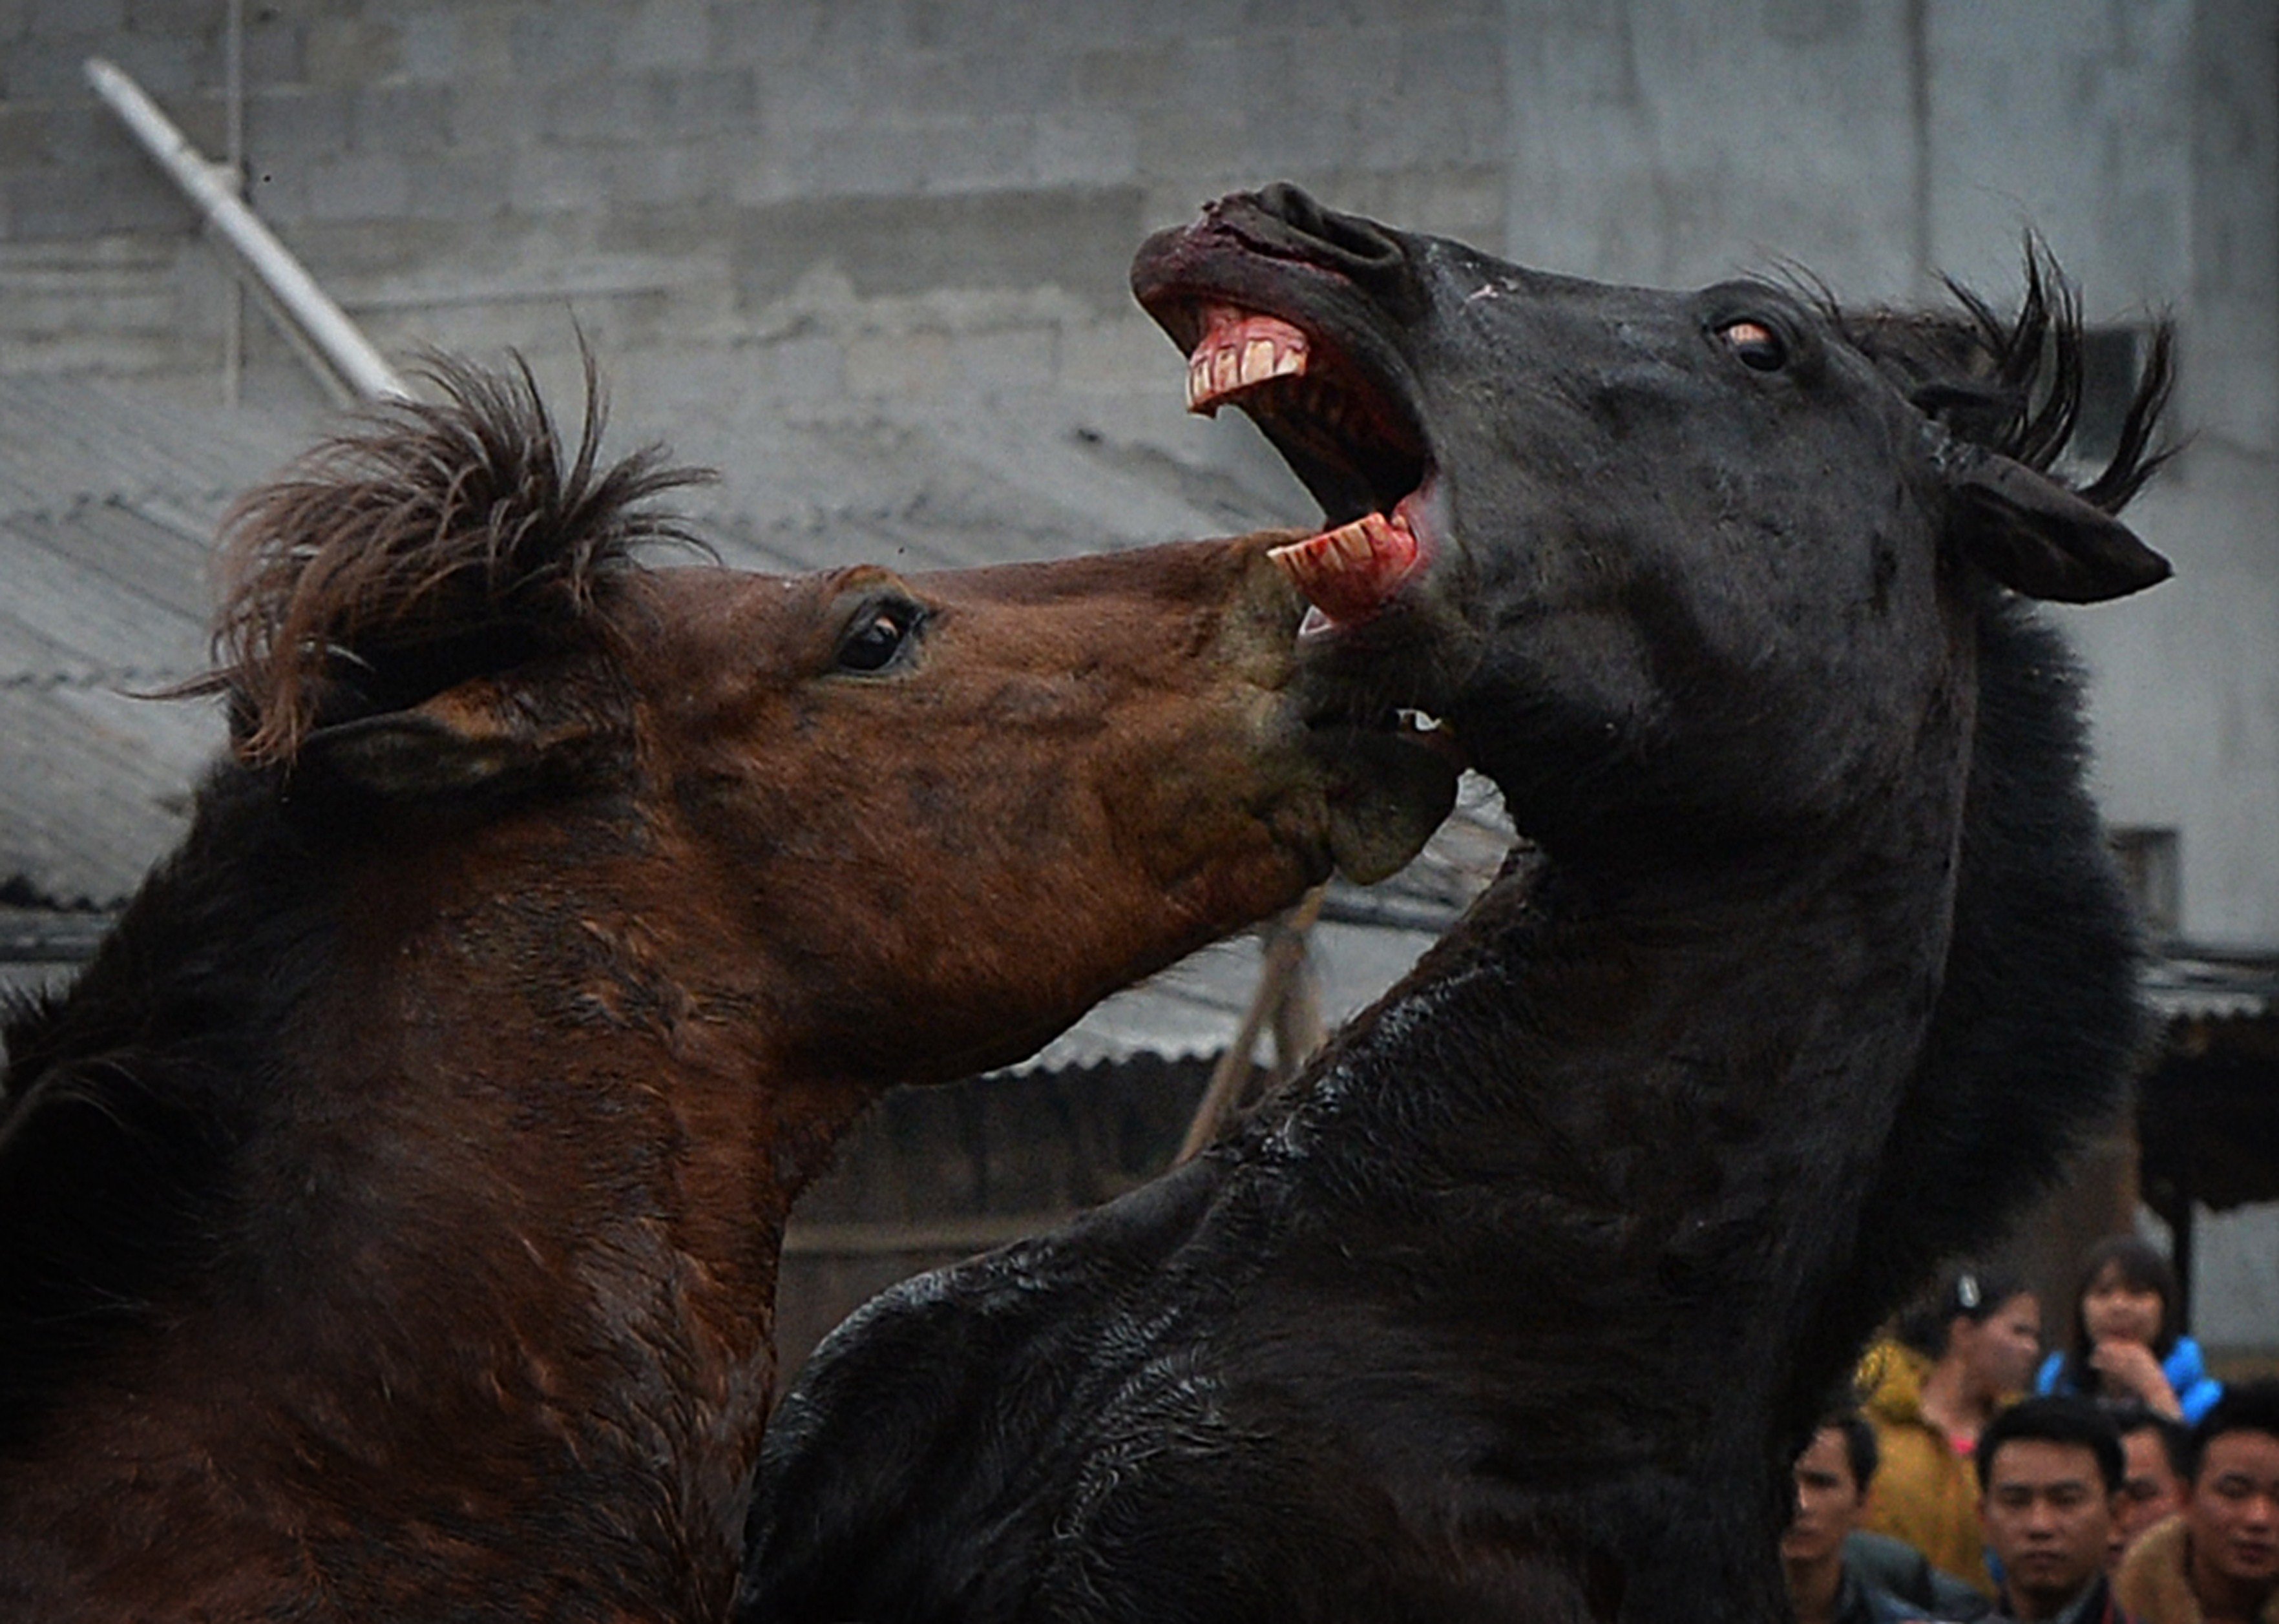 Two stallions fight during a traditional Chinese New Year horse fighting competition for the Year of the Horse at the Miao Minority village of Tiantou in Guangxi Province, Feb. 2, 2014. For the residents of Tiantou, a remote village in the Guangxi region, the 500-year-old tradition which pits male horses against each other in a fight over a female was the only way to kick off the Lunar New Year.